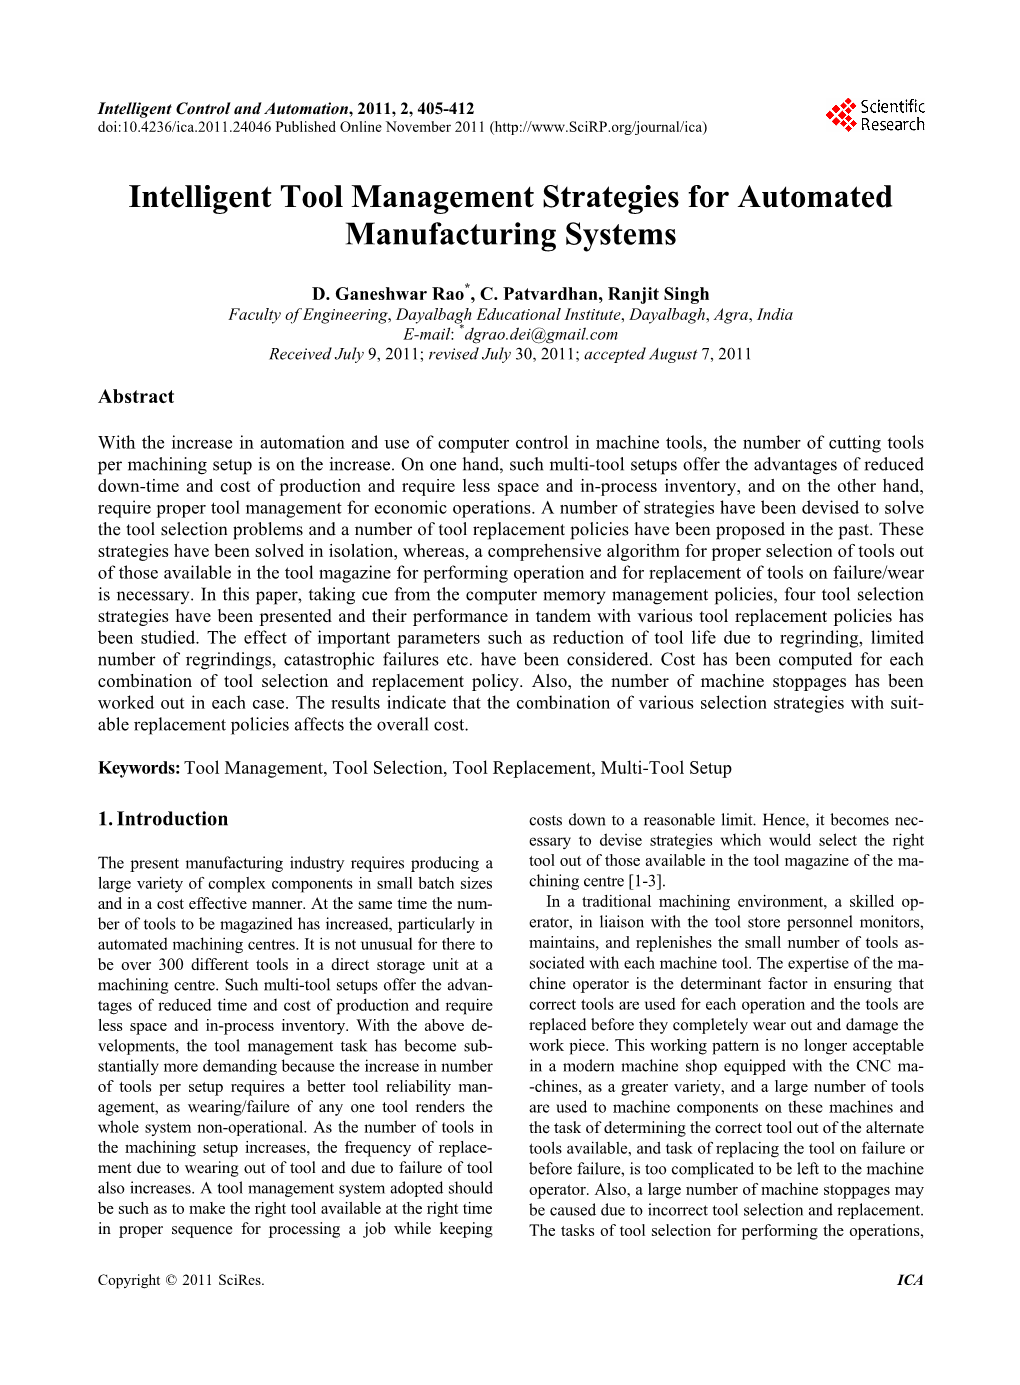 Intelligent Tool Management Strategies for Automated Manufacturing Systems